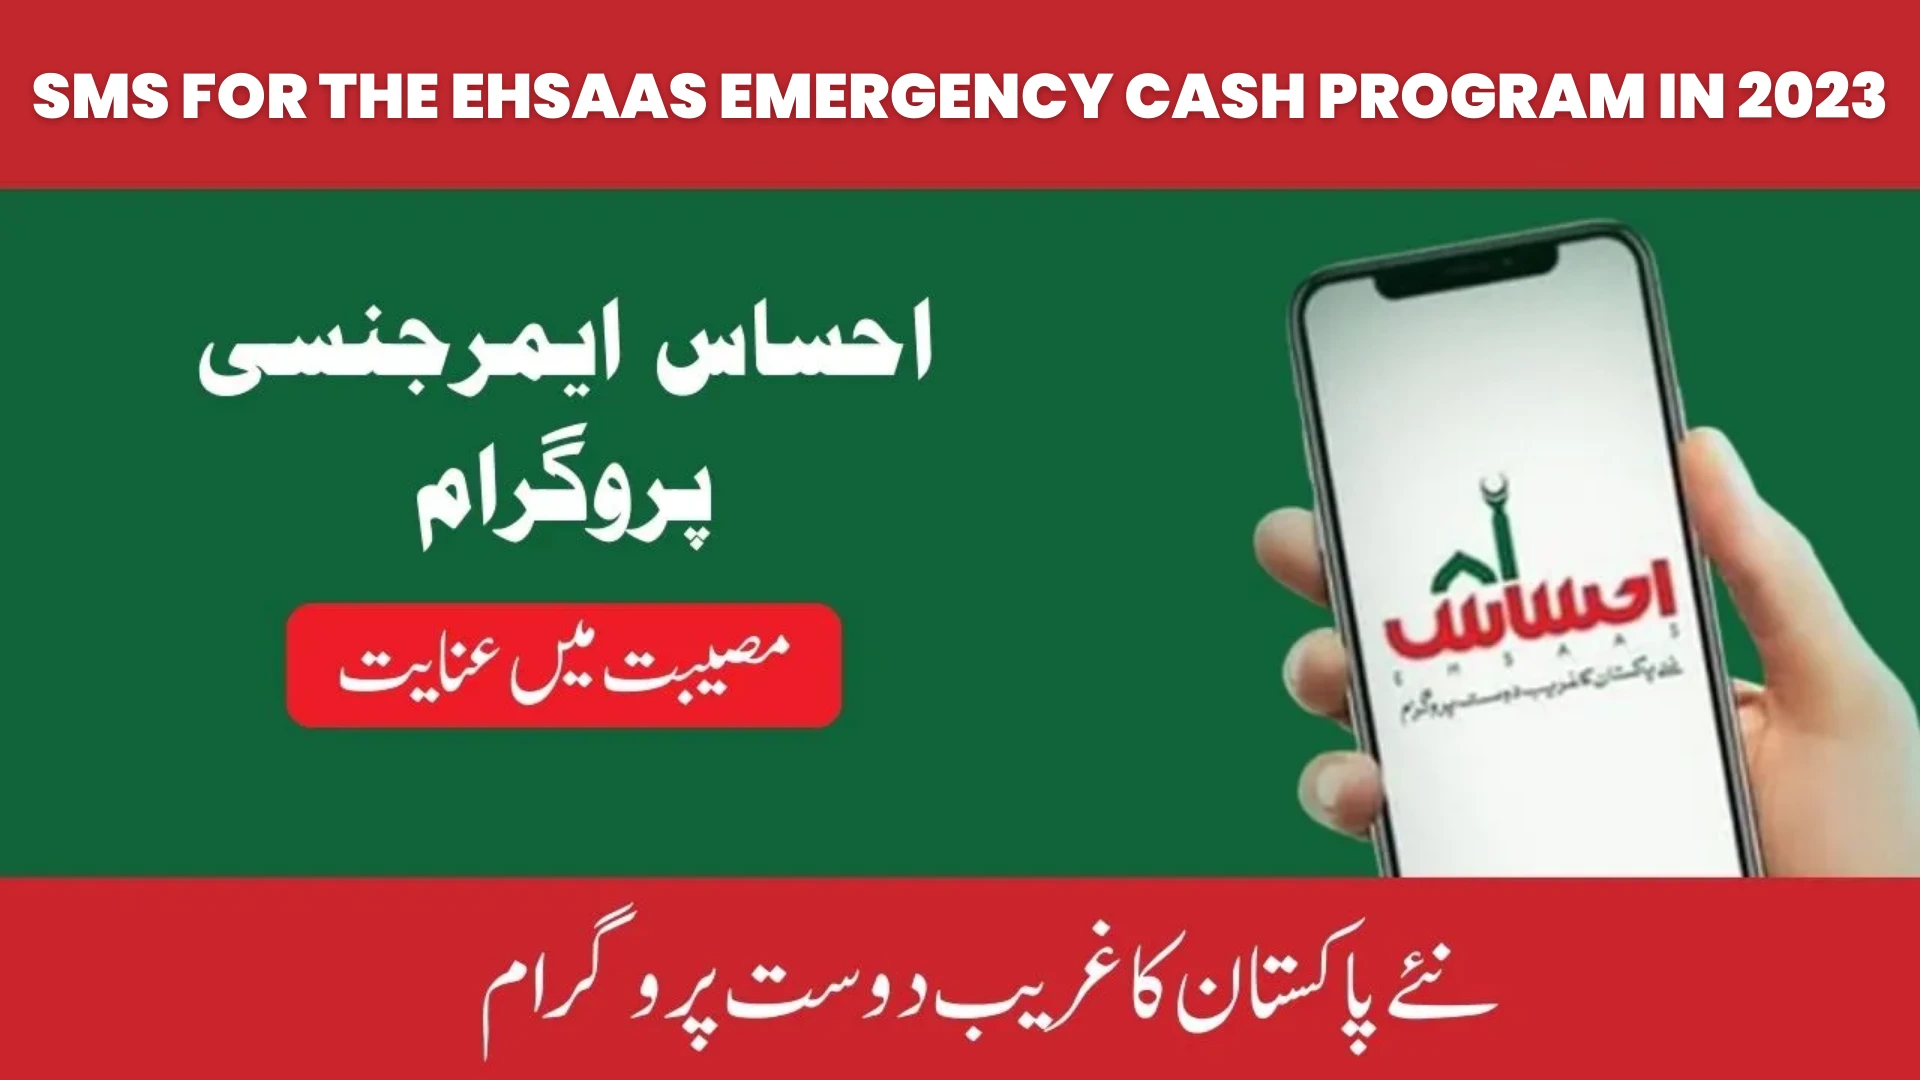 SMS for the Ehsaas Emergency Cash Program in 2023